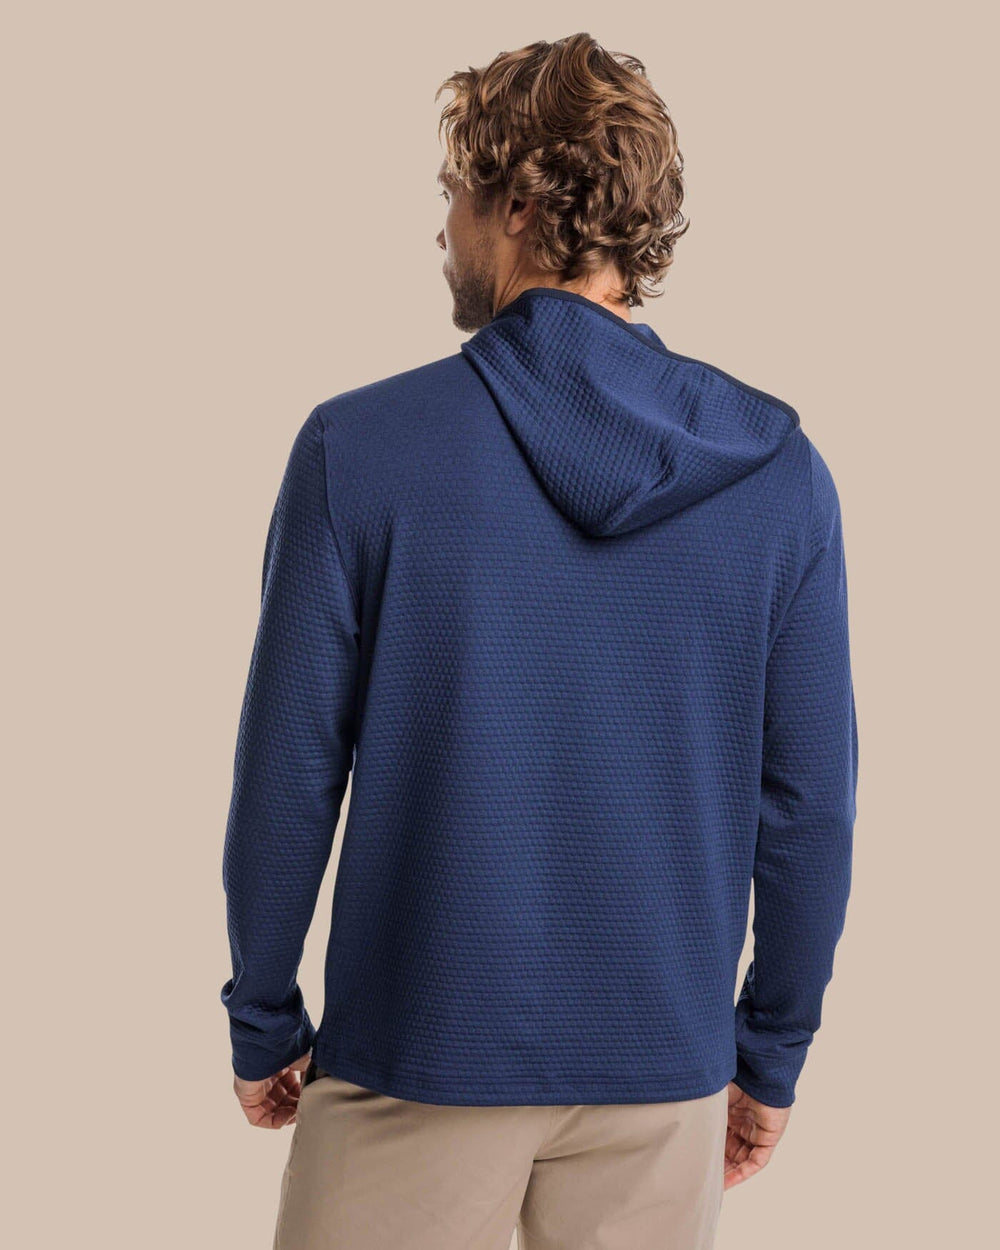 The back view of the Southern Tide Scuttle Heather Performance Quarter Zip Hoodie by Southern Tide - Heather True Navy